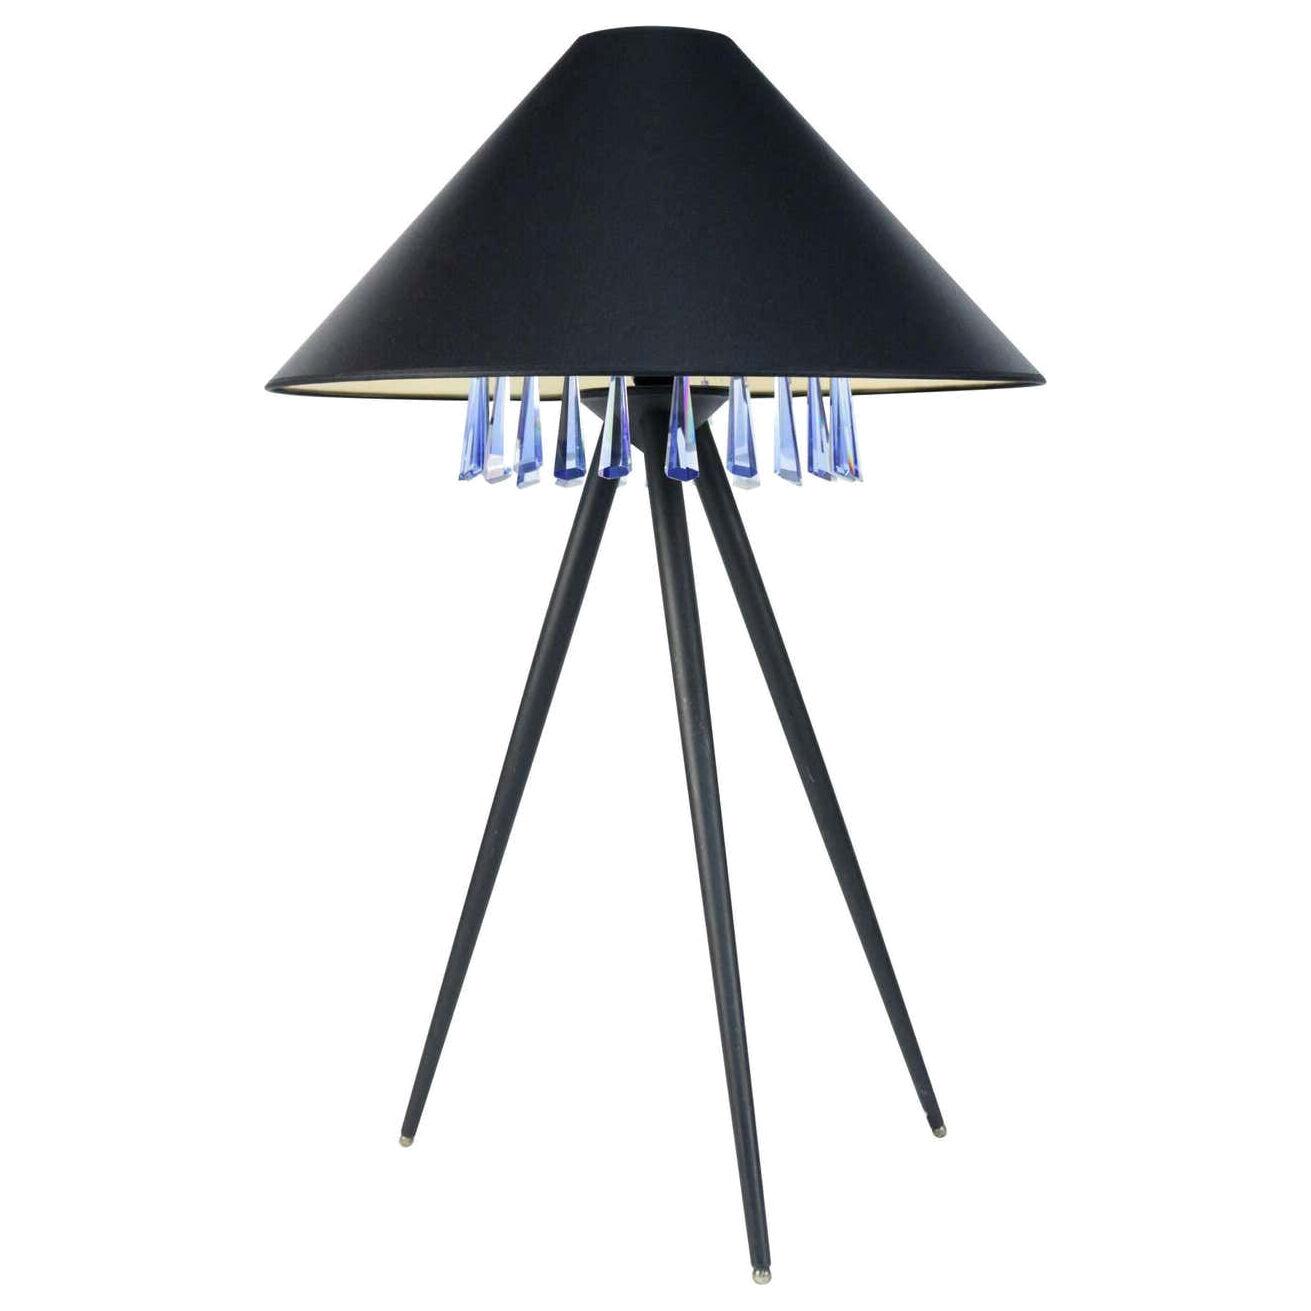 1970 Table Lamp Designed by Chrystiane Charles for the Maison Charles